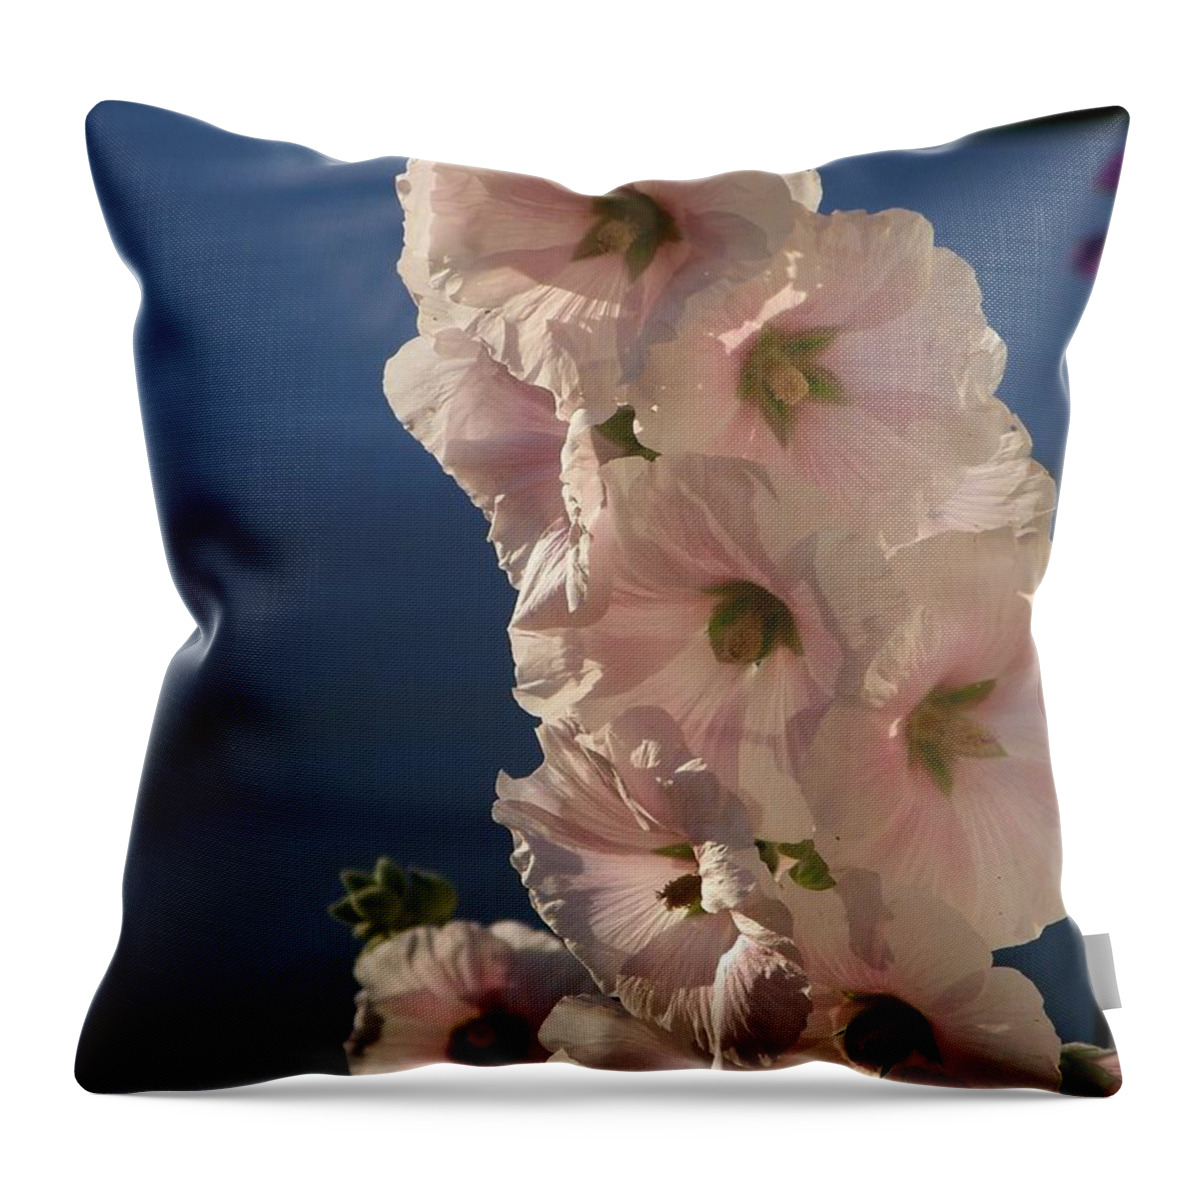 Floral Throw Pillow featuring the photograph Hollyhocks - Photograph by Jackie Mueller-Jones